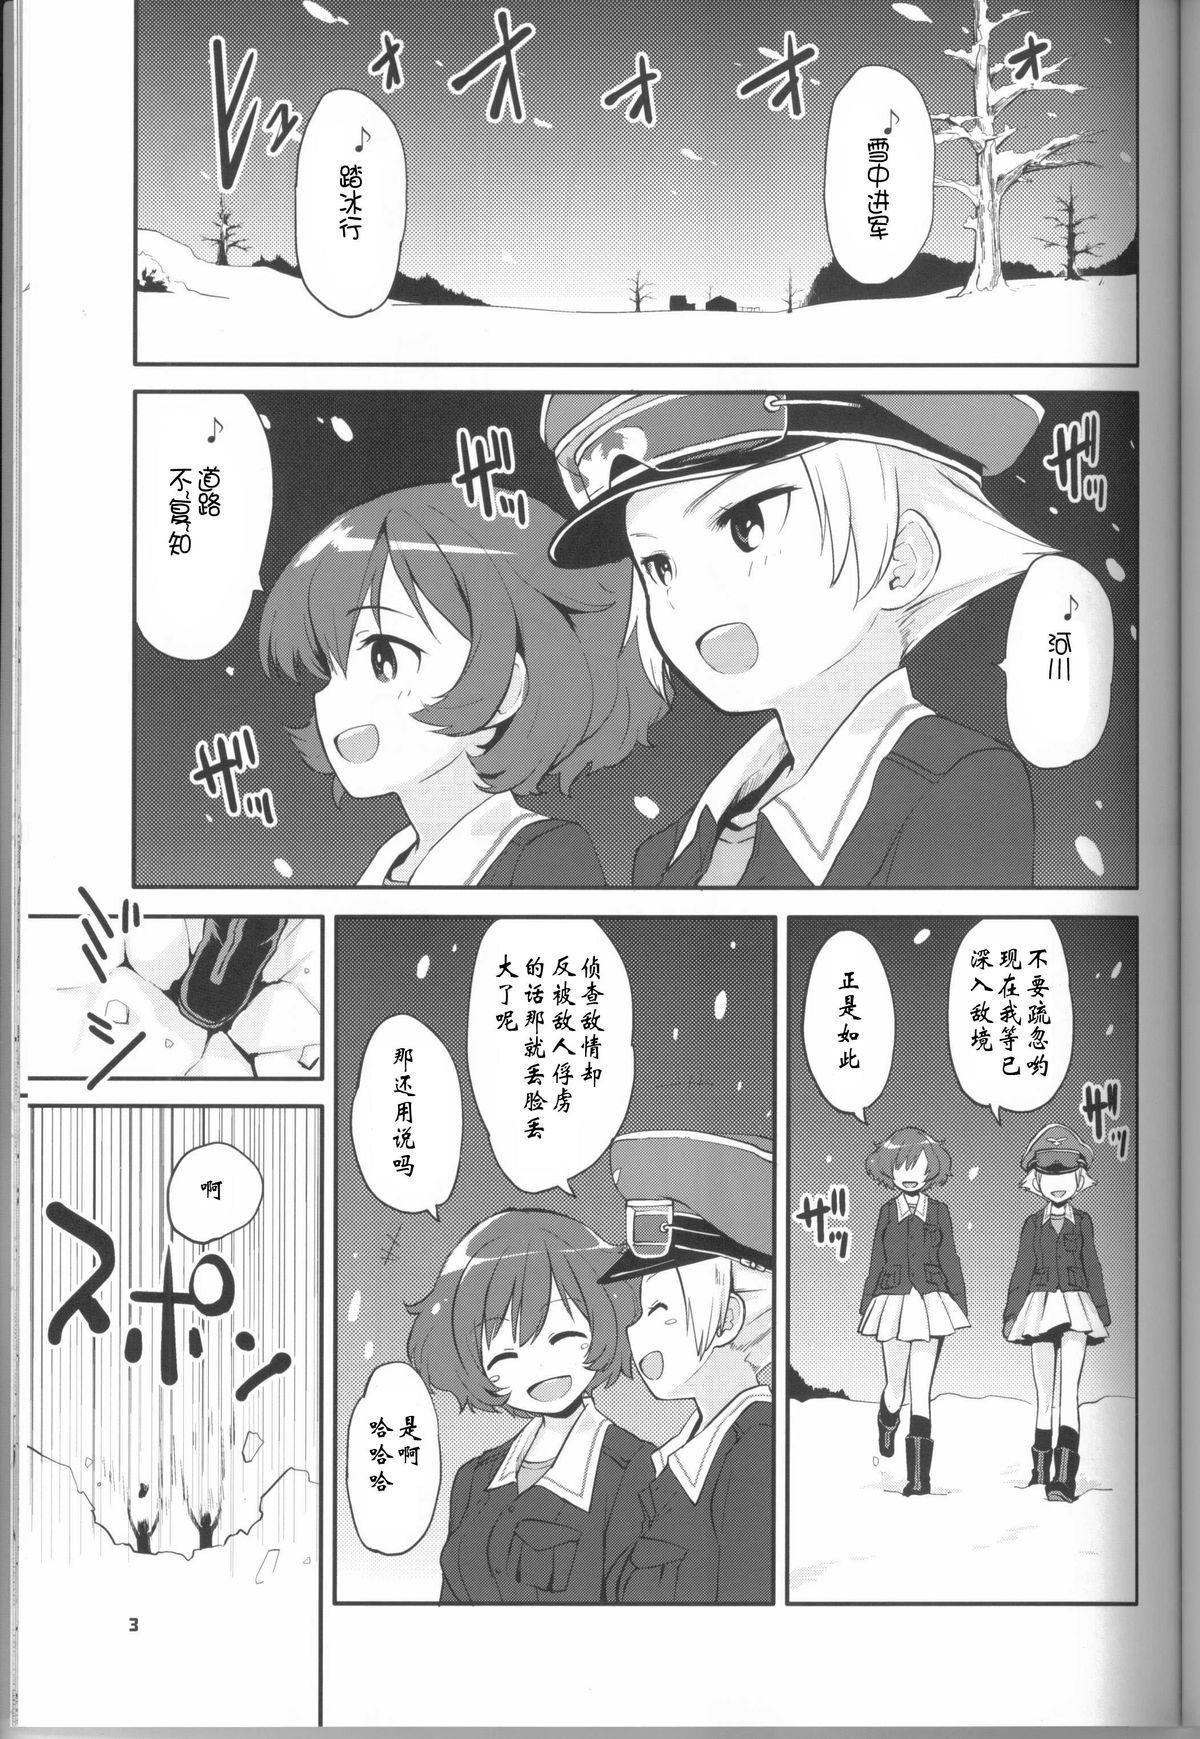 Foot Fetish The General Frost Has Come! - Girls und panzer Free Oral Sex - Page 2